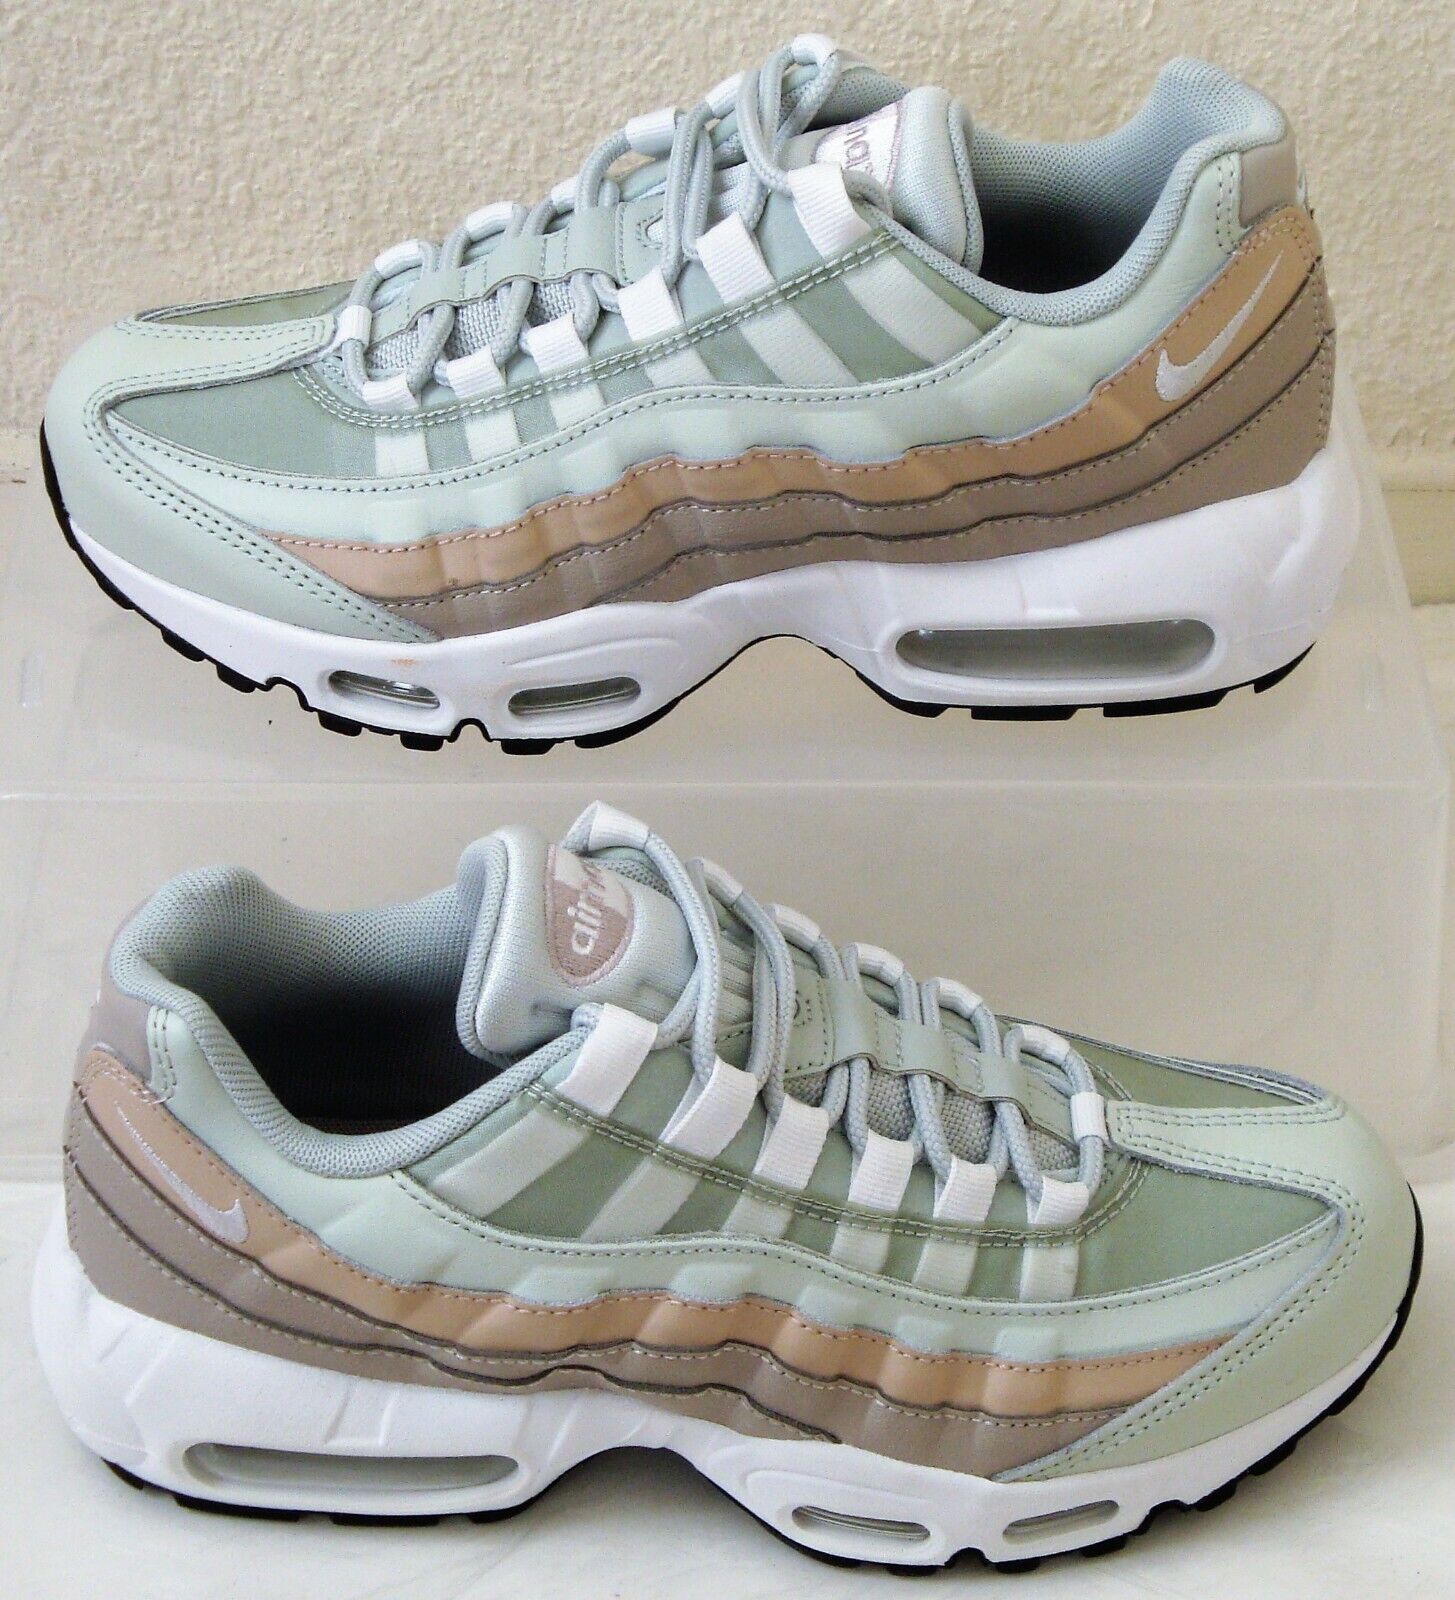 New Nike Air Max 95 Light Silver Moon Particle Womens US Size 7.5 5 EUR 38.5 | eBay